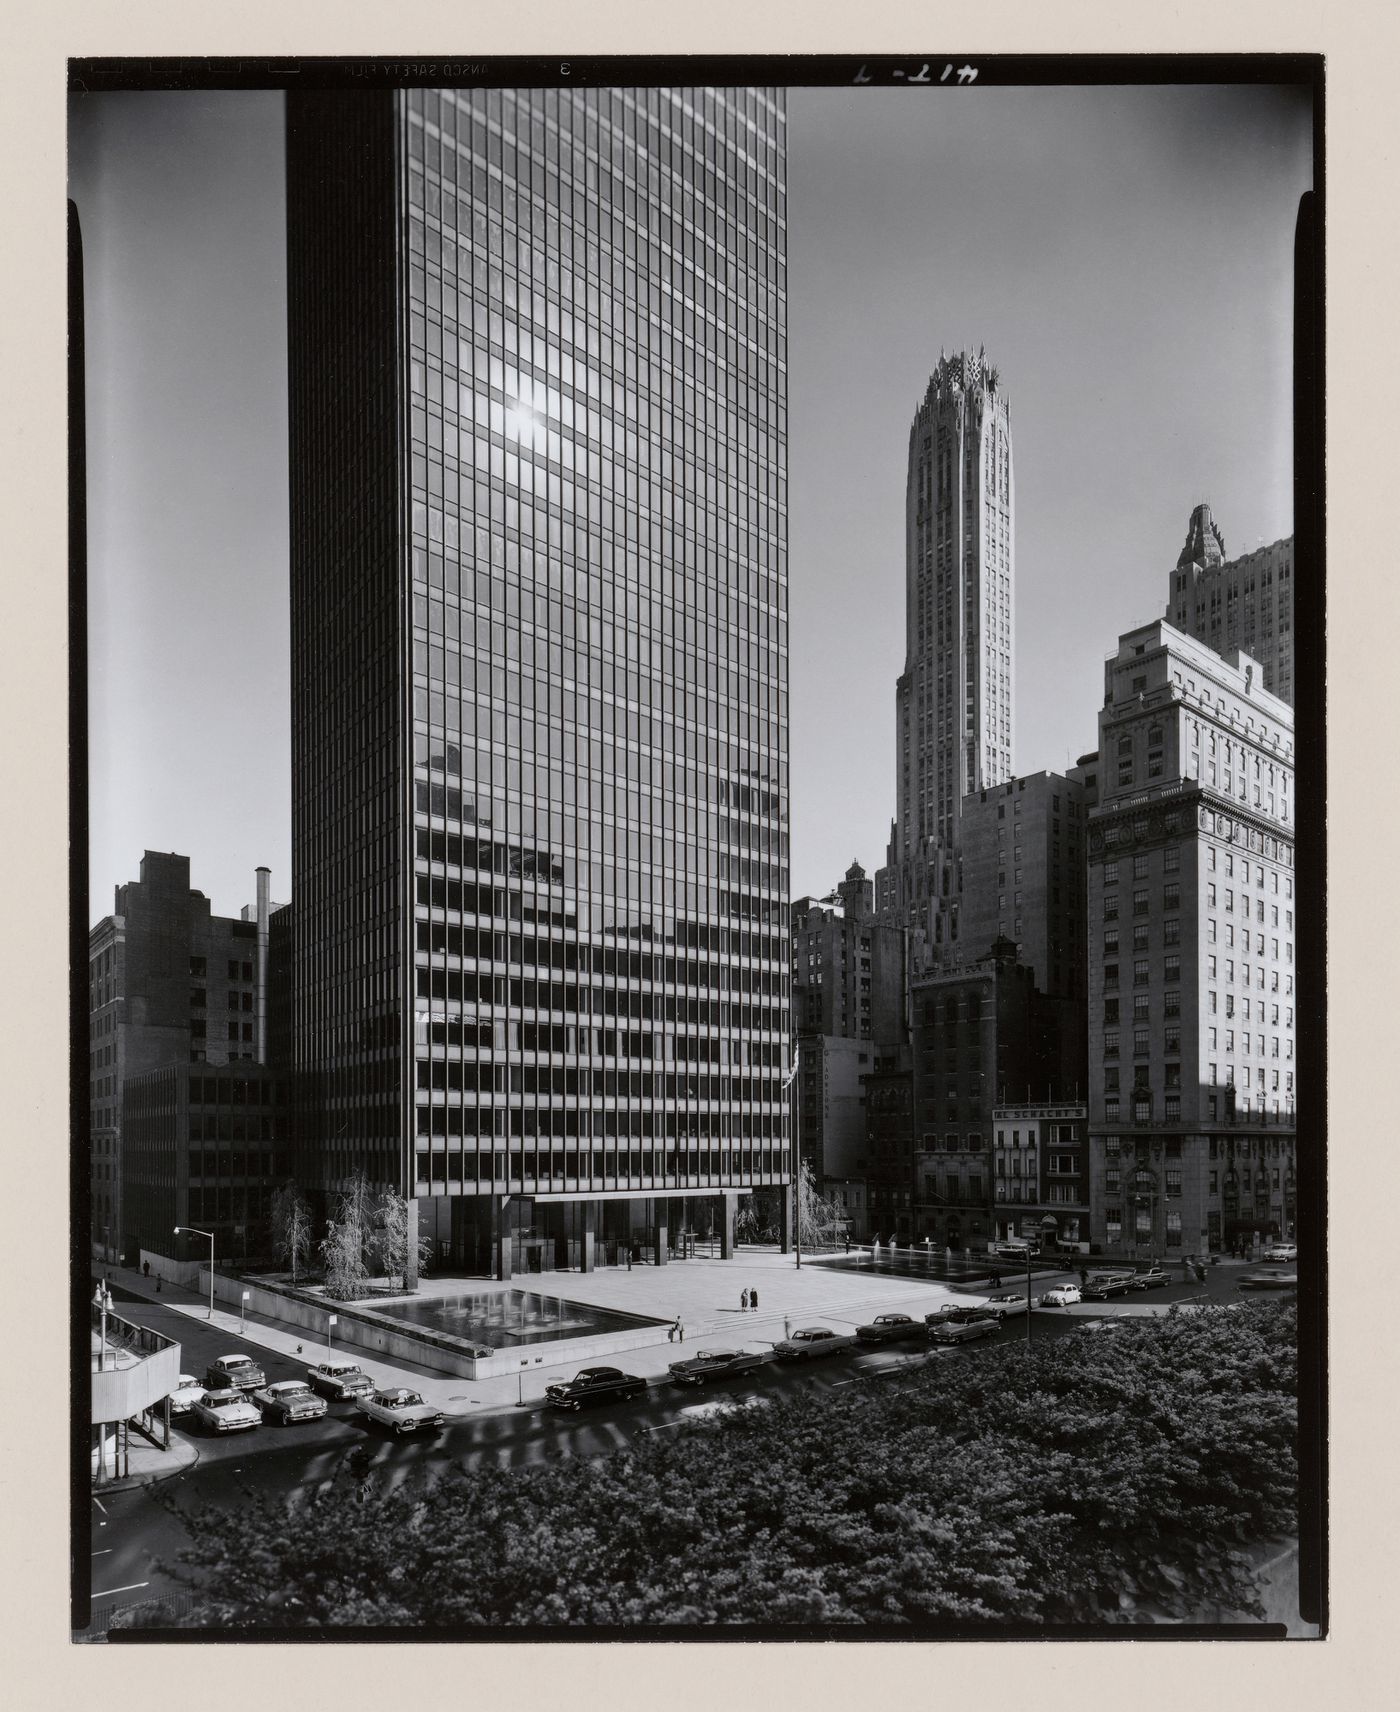 Partial view of the Seagram Building and plaza from across the street, New York City